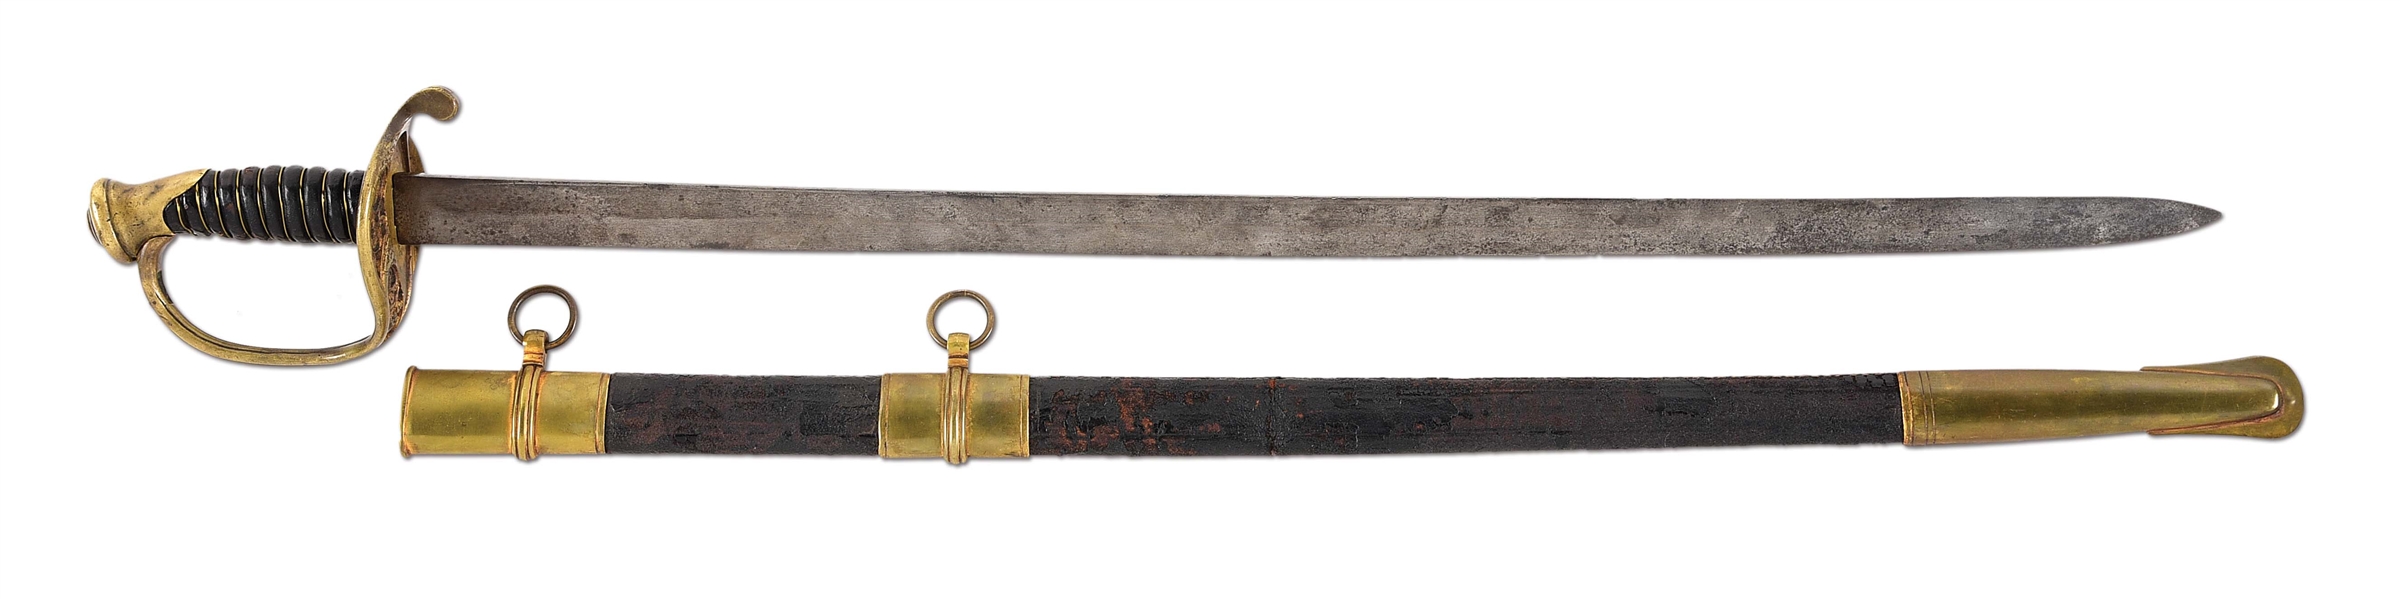 CIVIL WAR CONFEDERATE FOOT OFFICERS SWORD PUBLISHED IN COLLECTING THE CONFEDERACY.